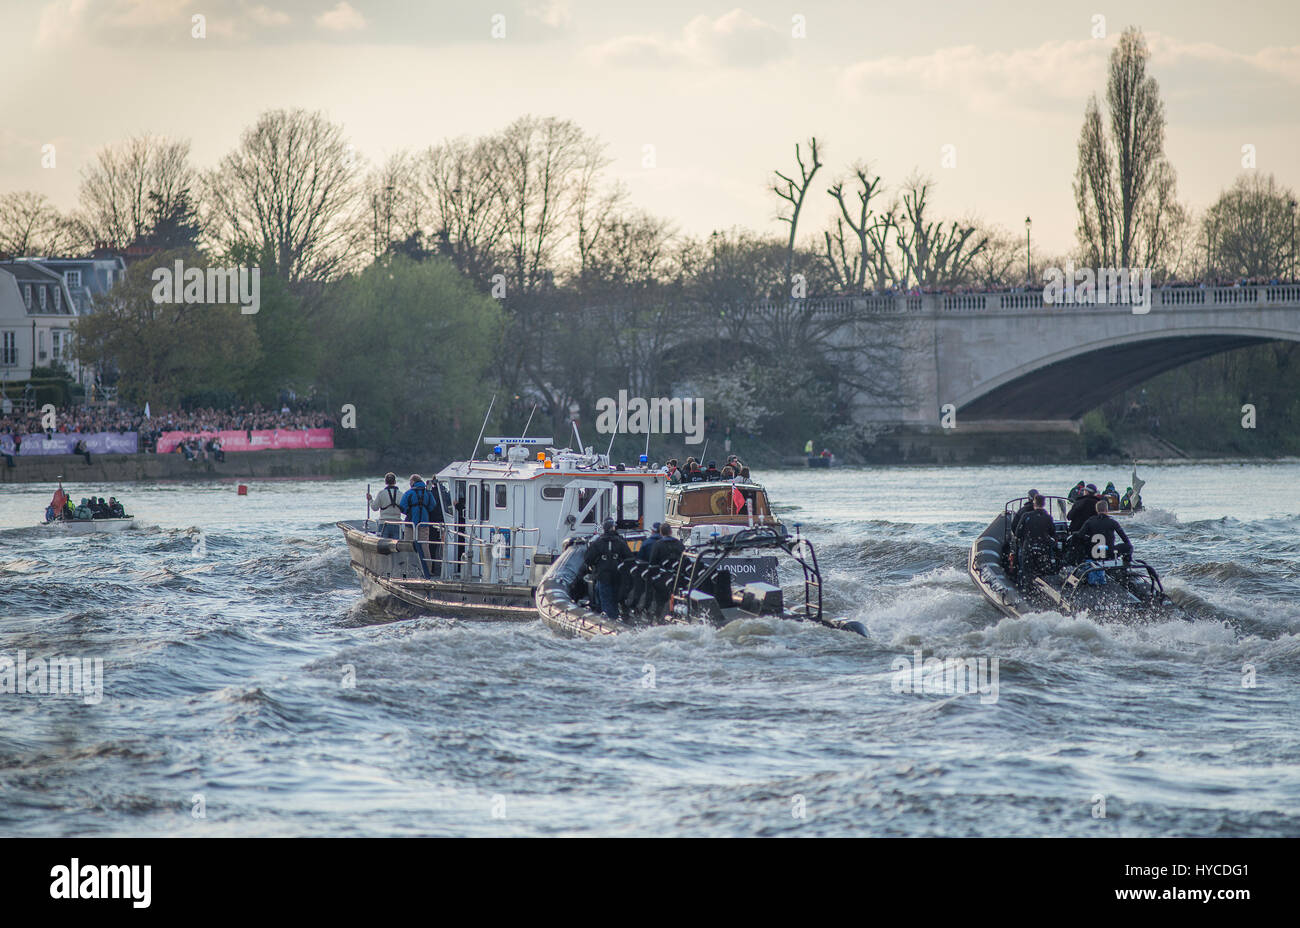 Chase-Boote folgen den Rennteams in Richtung Finish The Cancer Research UK Boat Race 2017 in Mortlake, 2. April 2017, London, UK Stockfoto